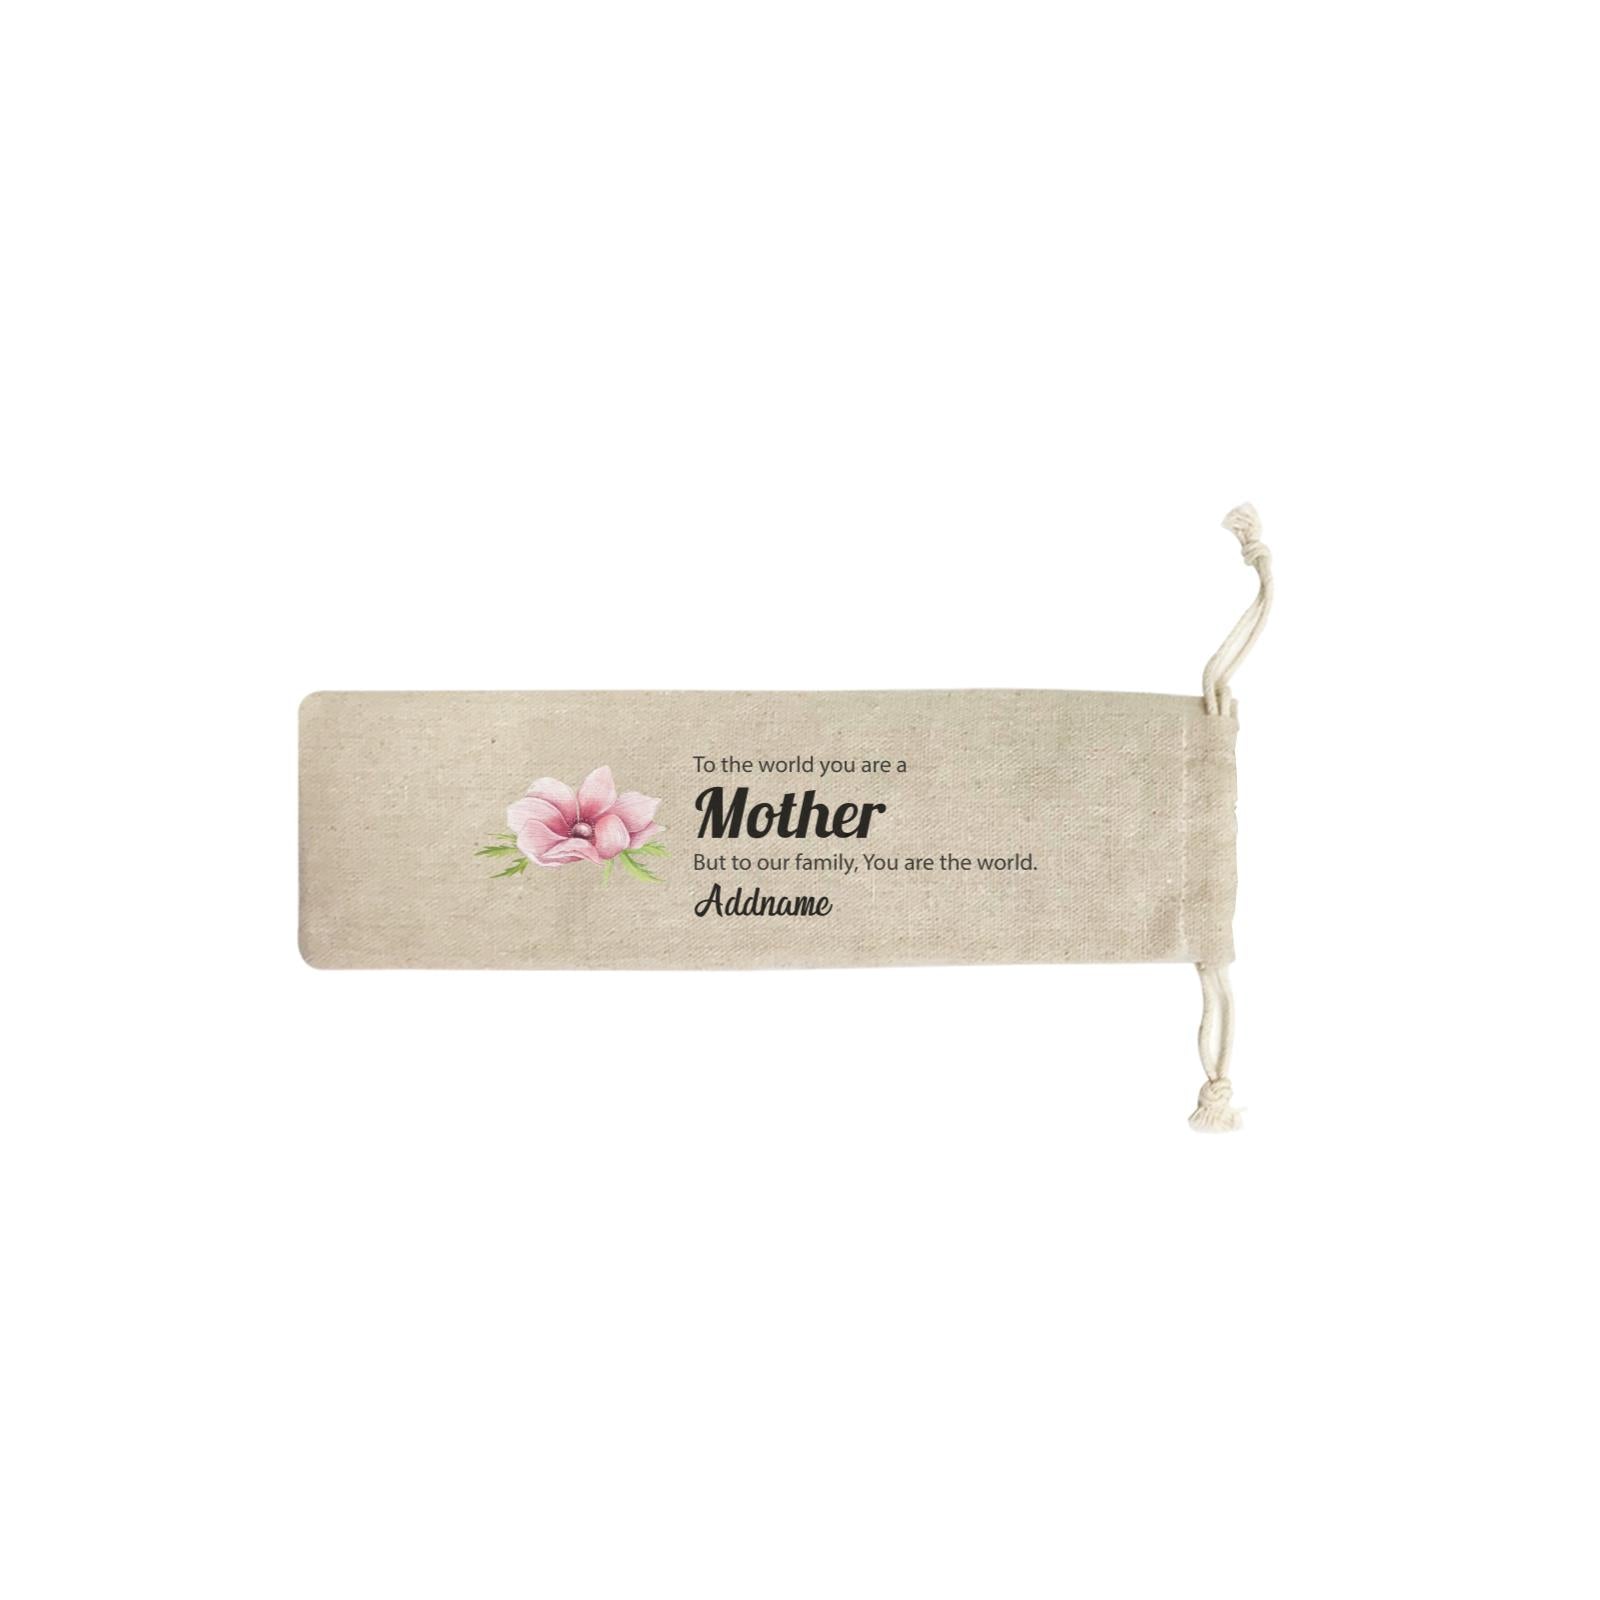 Sweet Mom Quotes 1 To The World You Are A Mother But To Our Family, You Are The World Addname SB Straw Pouch (No Straws included)